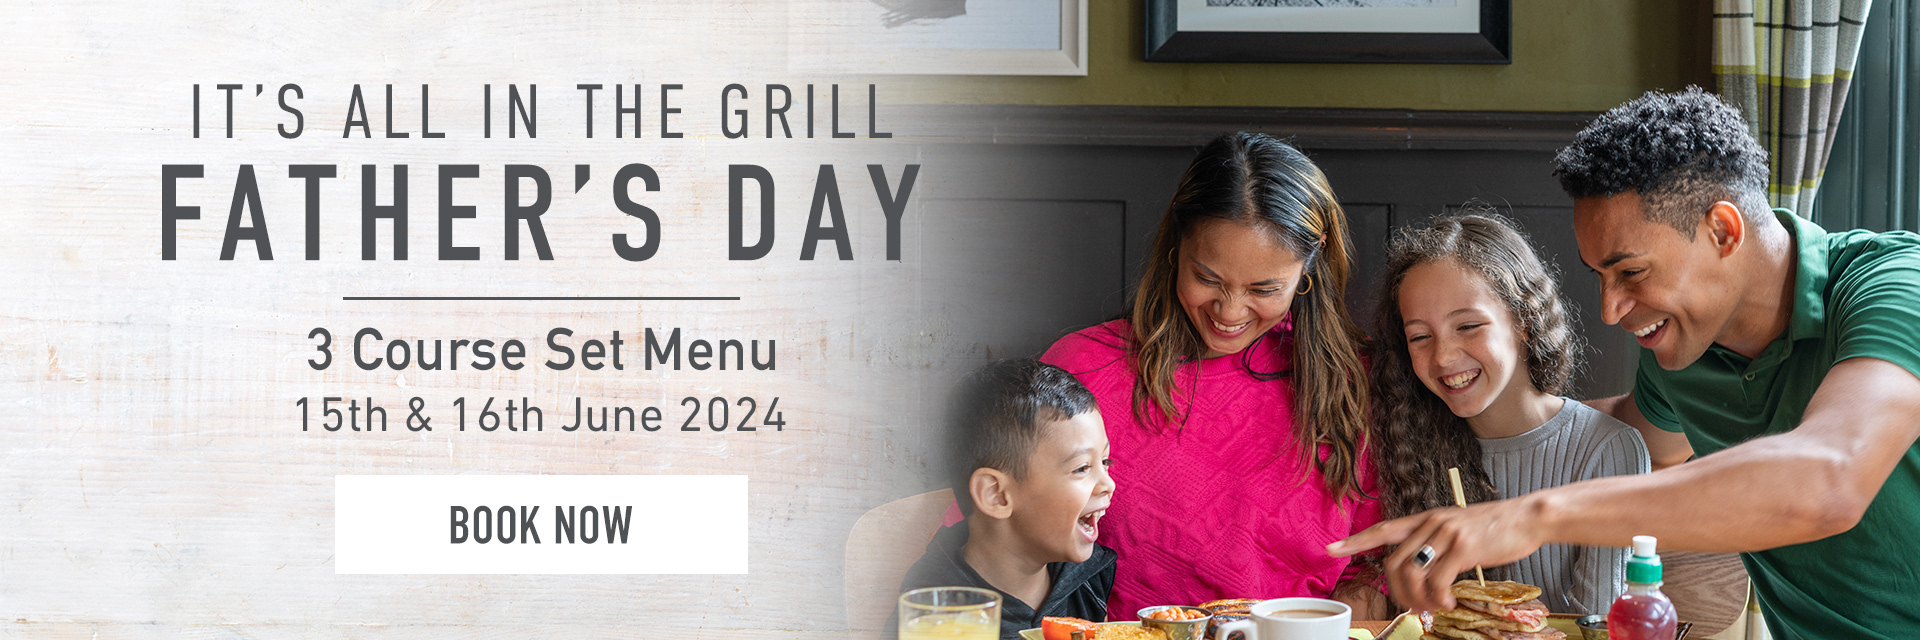 Father’s Day at HORSE & GROOM POLEGATE